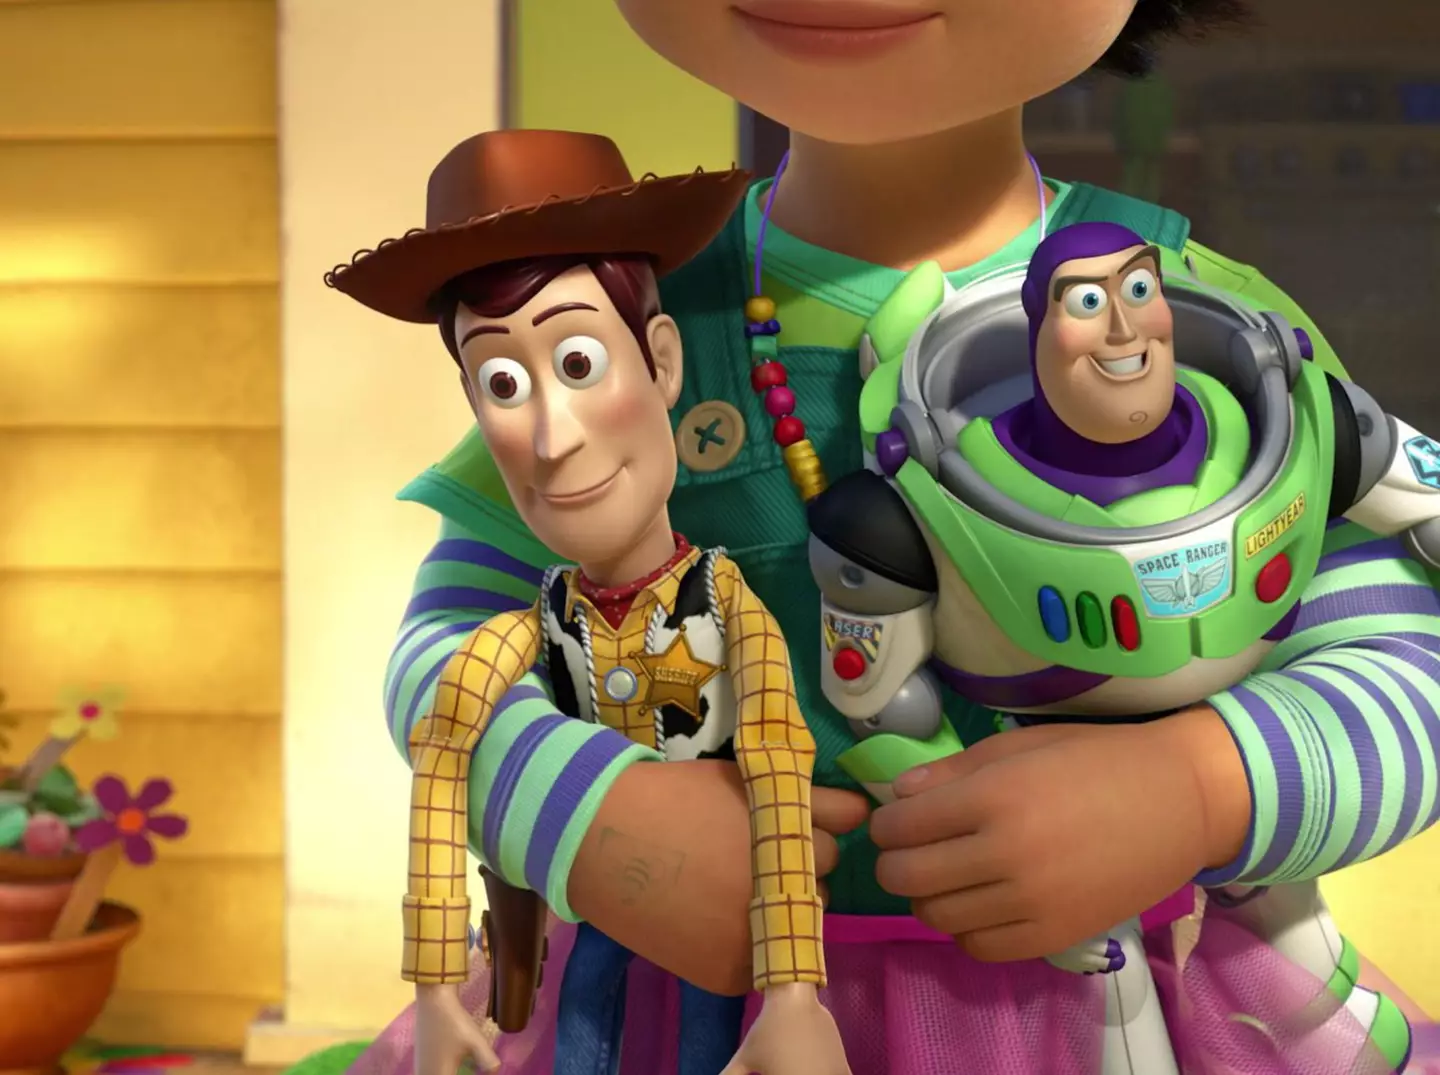 The automated voice inside of Woody is actually voiced by Tom Hanks' brother, Jim.